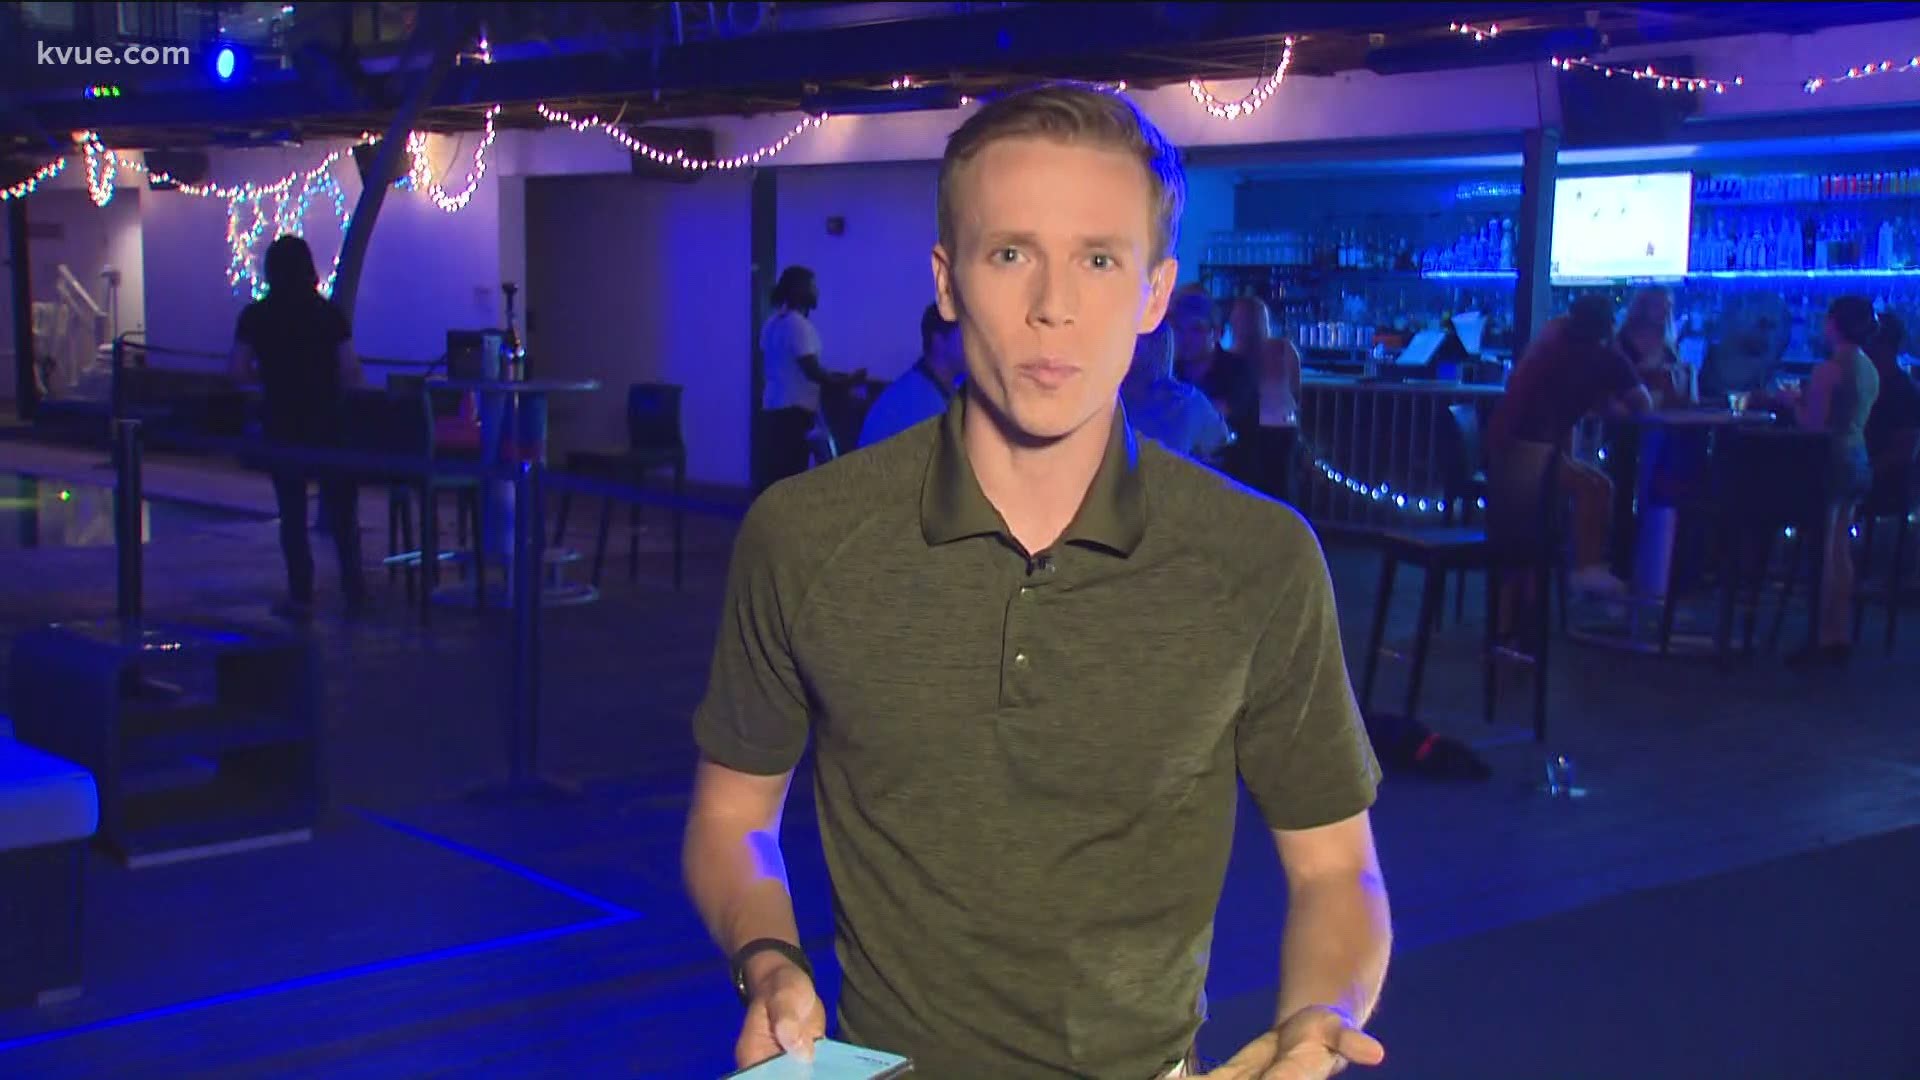 Bars across Texas are back open on Saturday night, with some restrictions. KVUE's Bryce Newberry goes bar hopping.